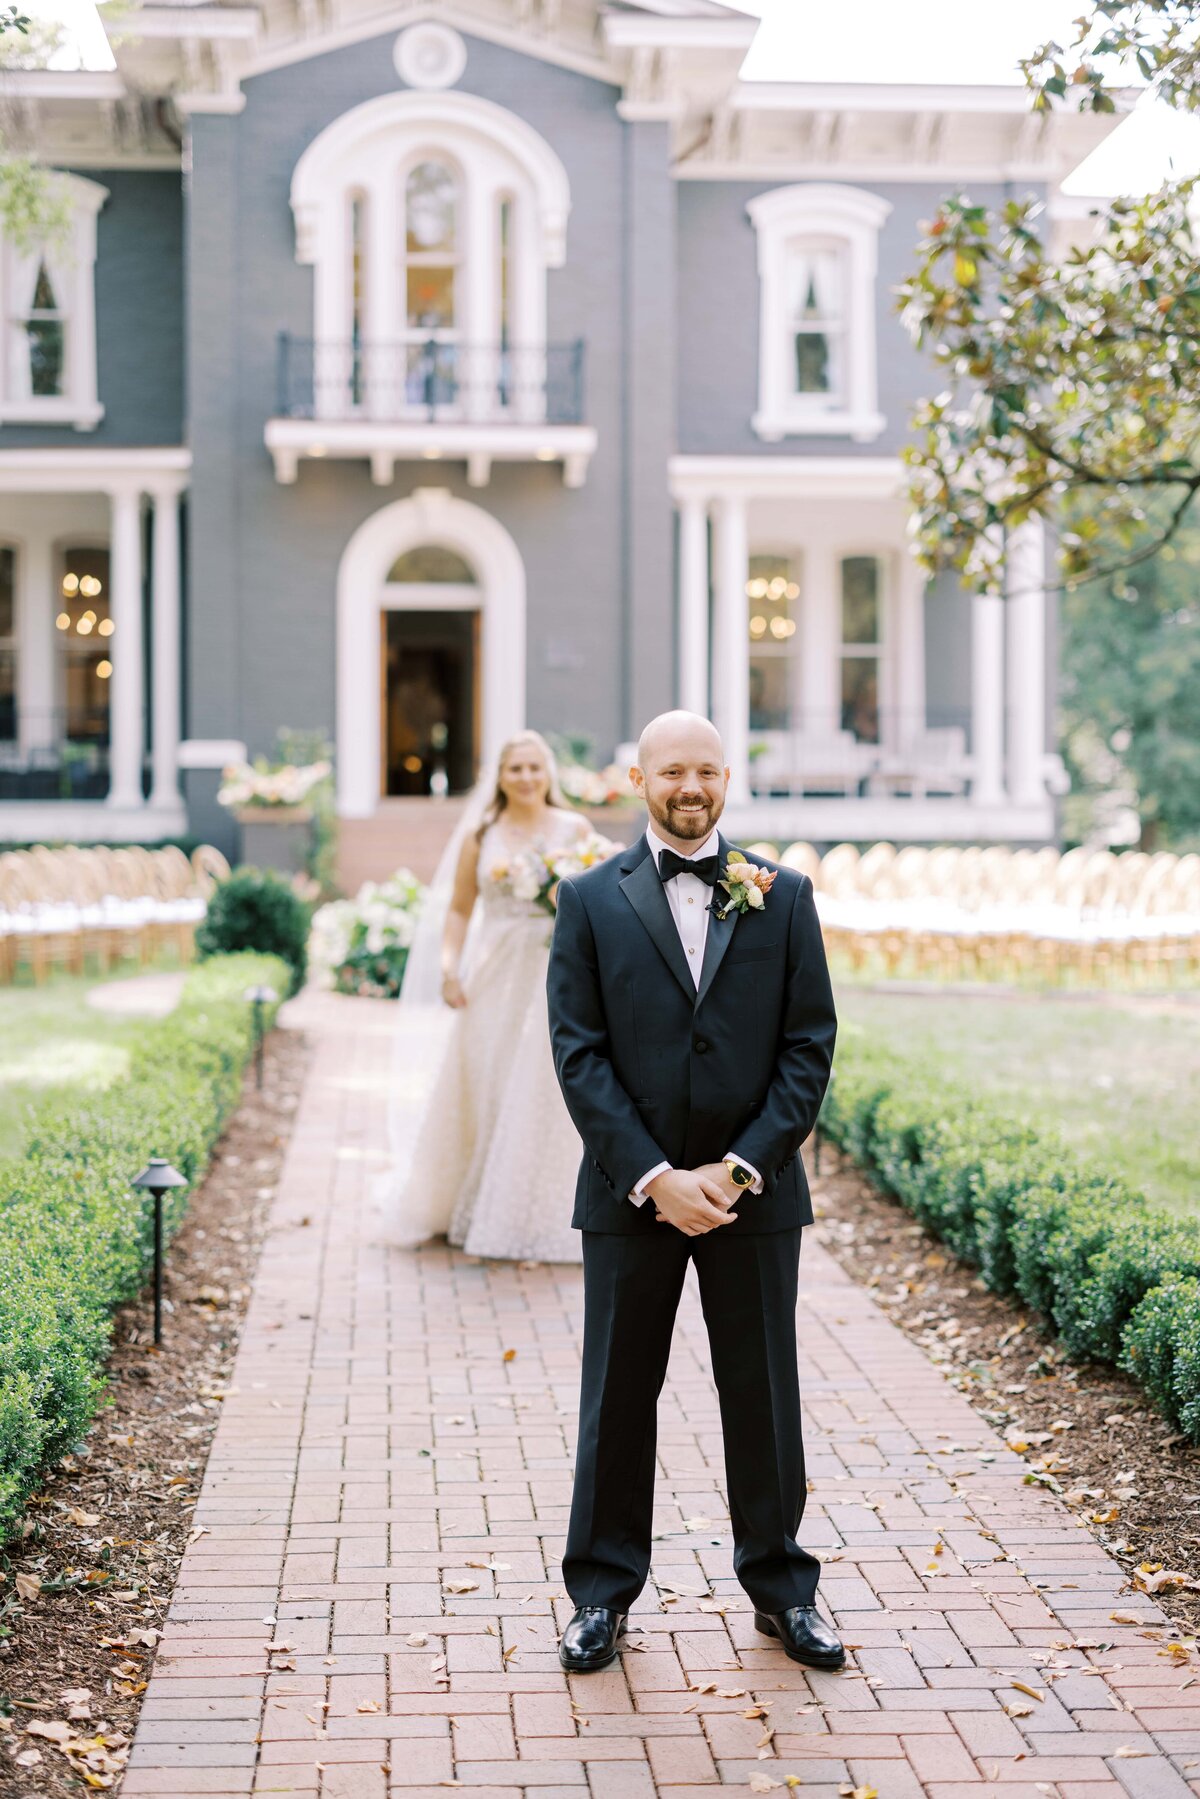 Danielle-Defayette-Photography-Heights-House-Wedding-Raleigh-278